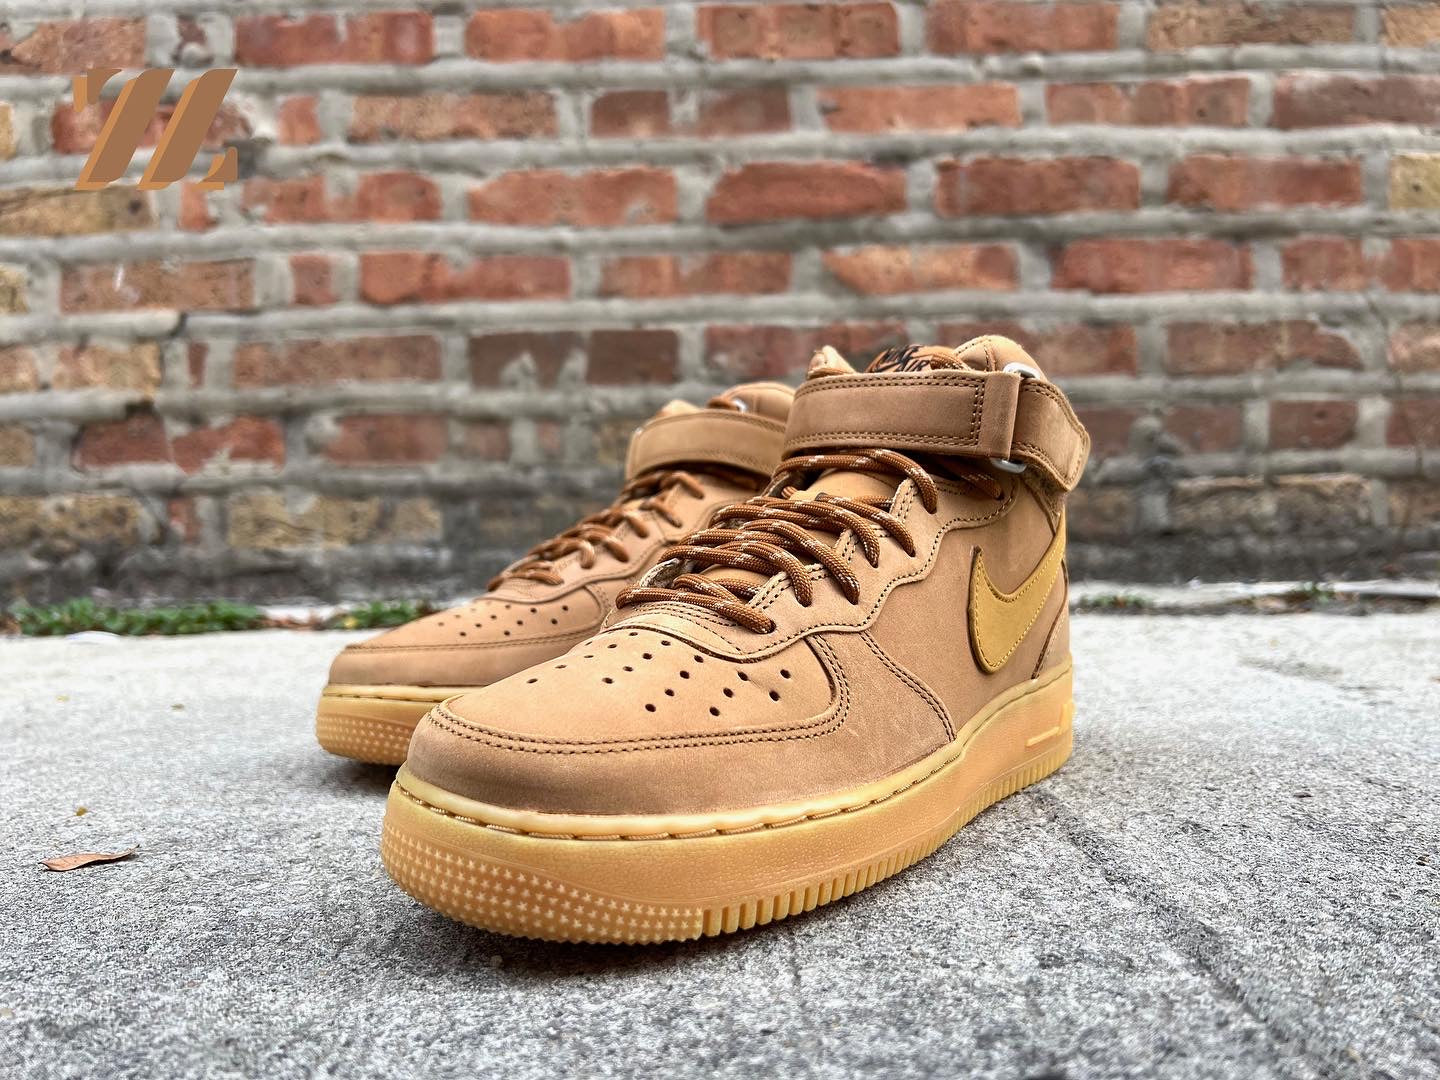 AIR FORCE 1 MID 07 WB